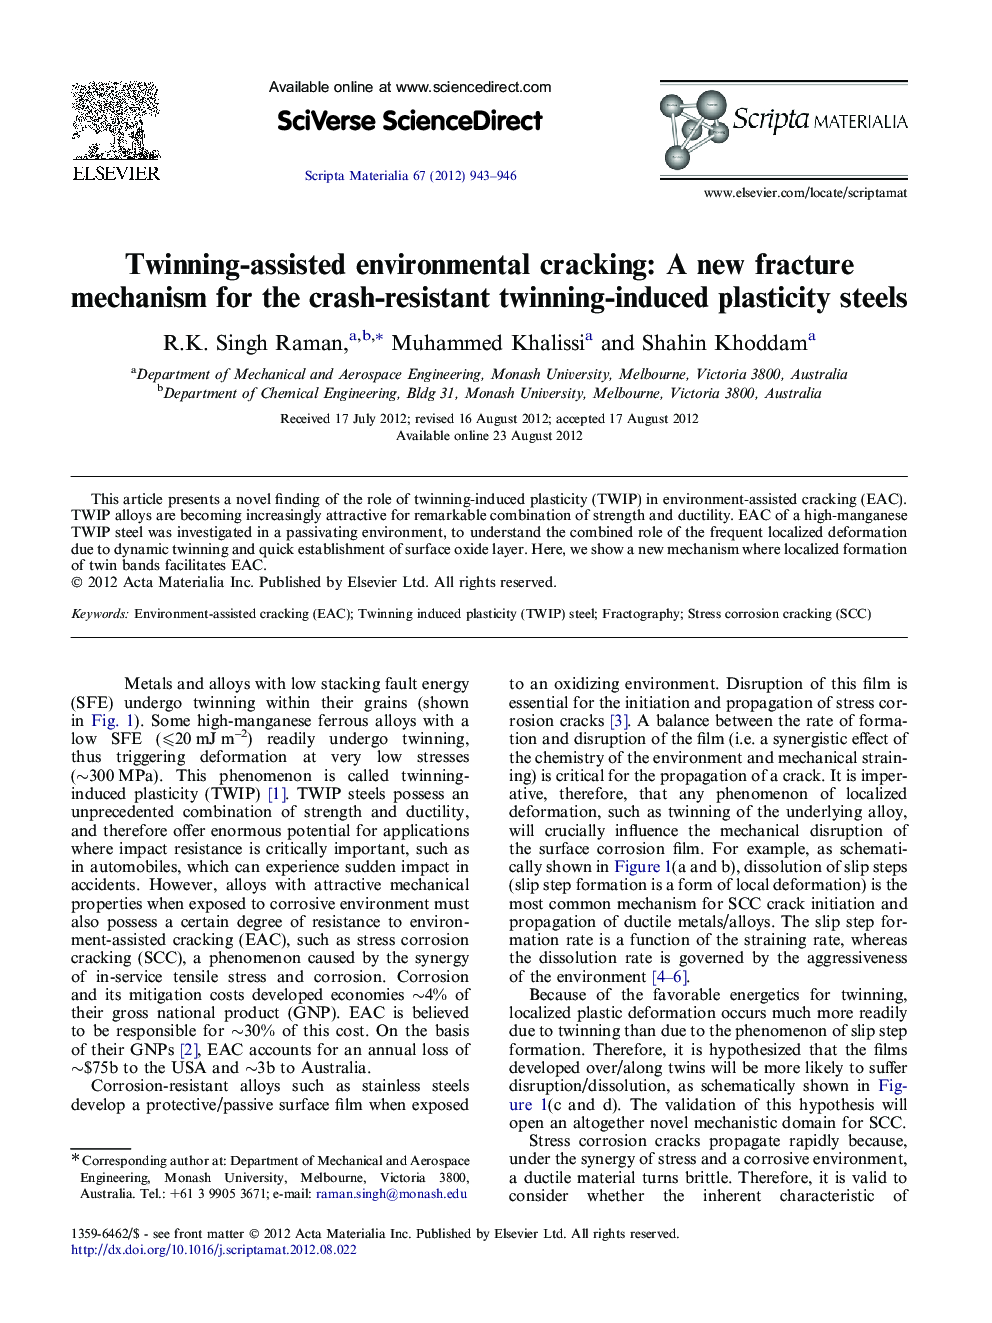 Twinning-assisted environmental cracking: A new fracture mechanism for the crash-resistant twinning-induced plasticity steels